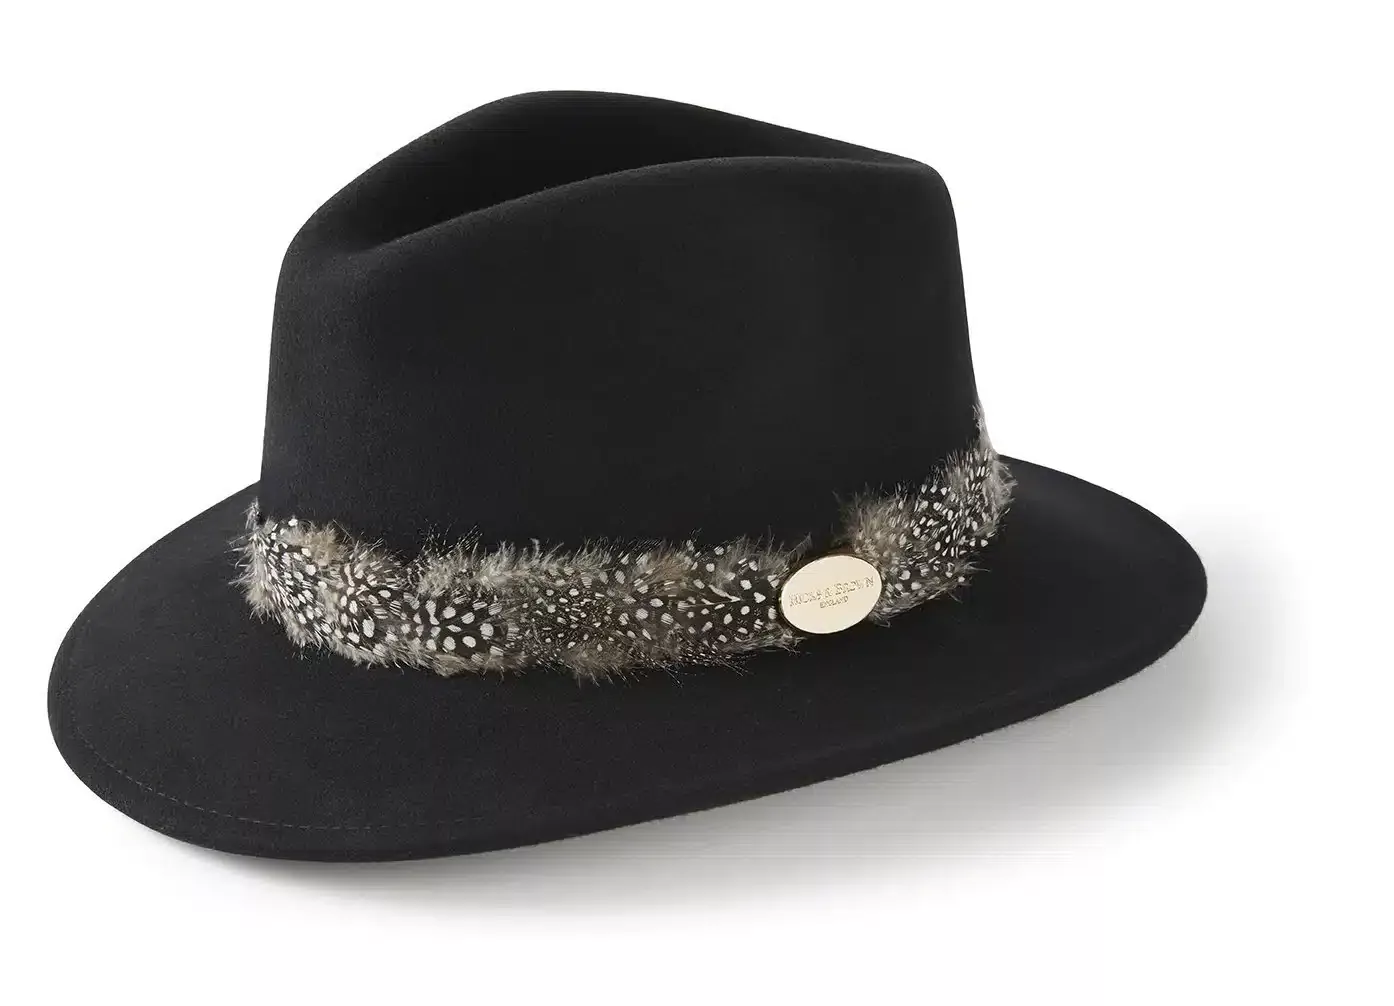 THE SUFFOLK FEDORA IN BLACK (GUINEA FEATHER WRAP)